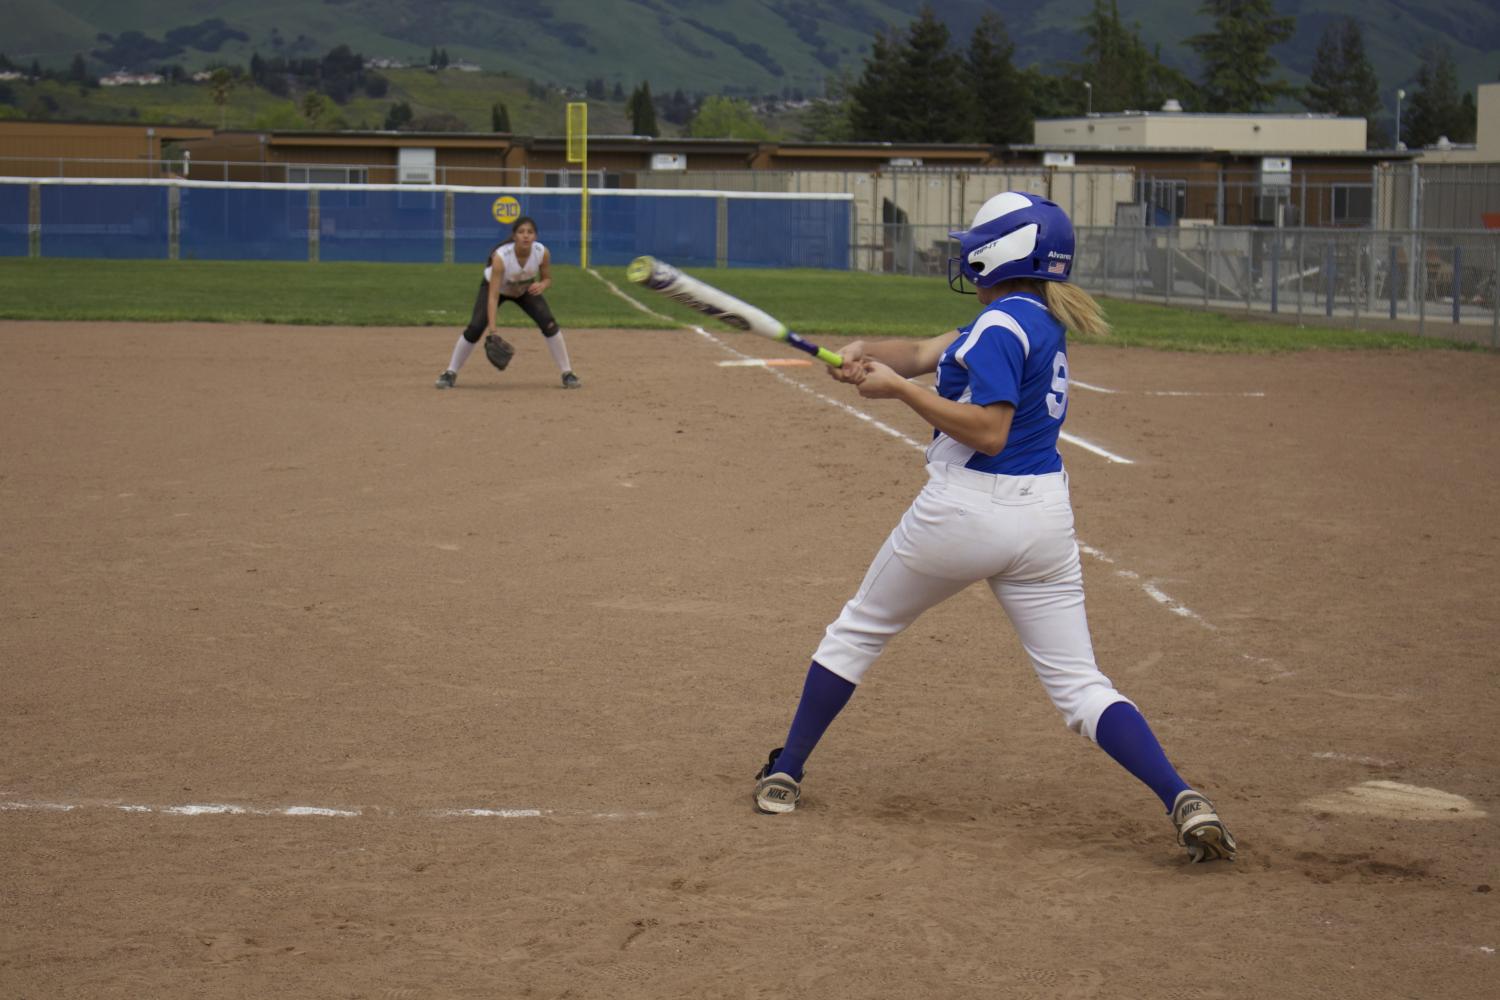 Team captain Annelise Alvarez (12) goes up to bat in the fifth inning and hits the ball, helping Irvington win an extra point.